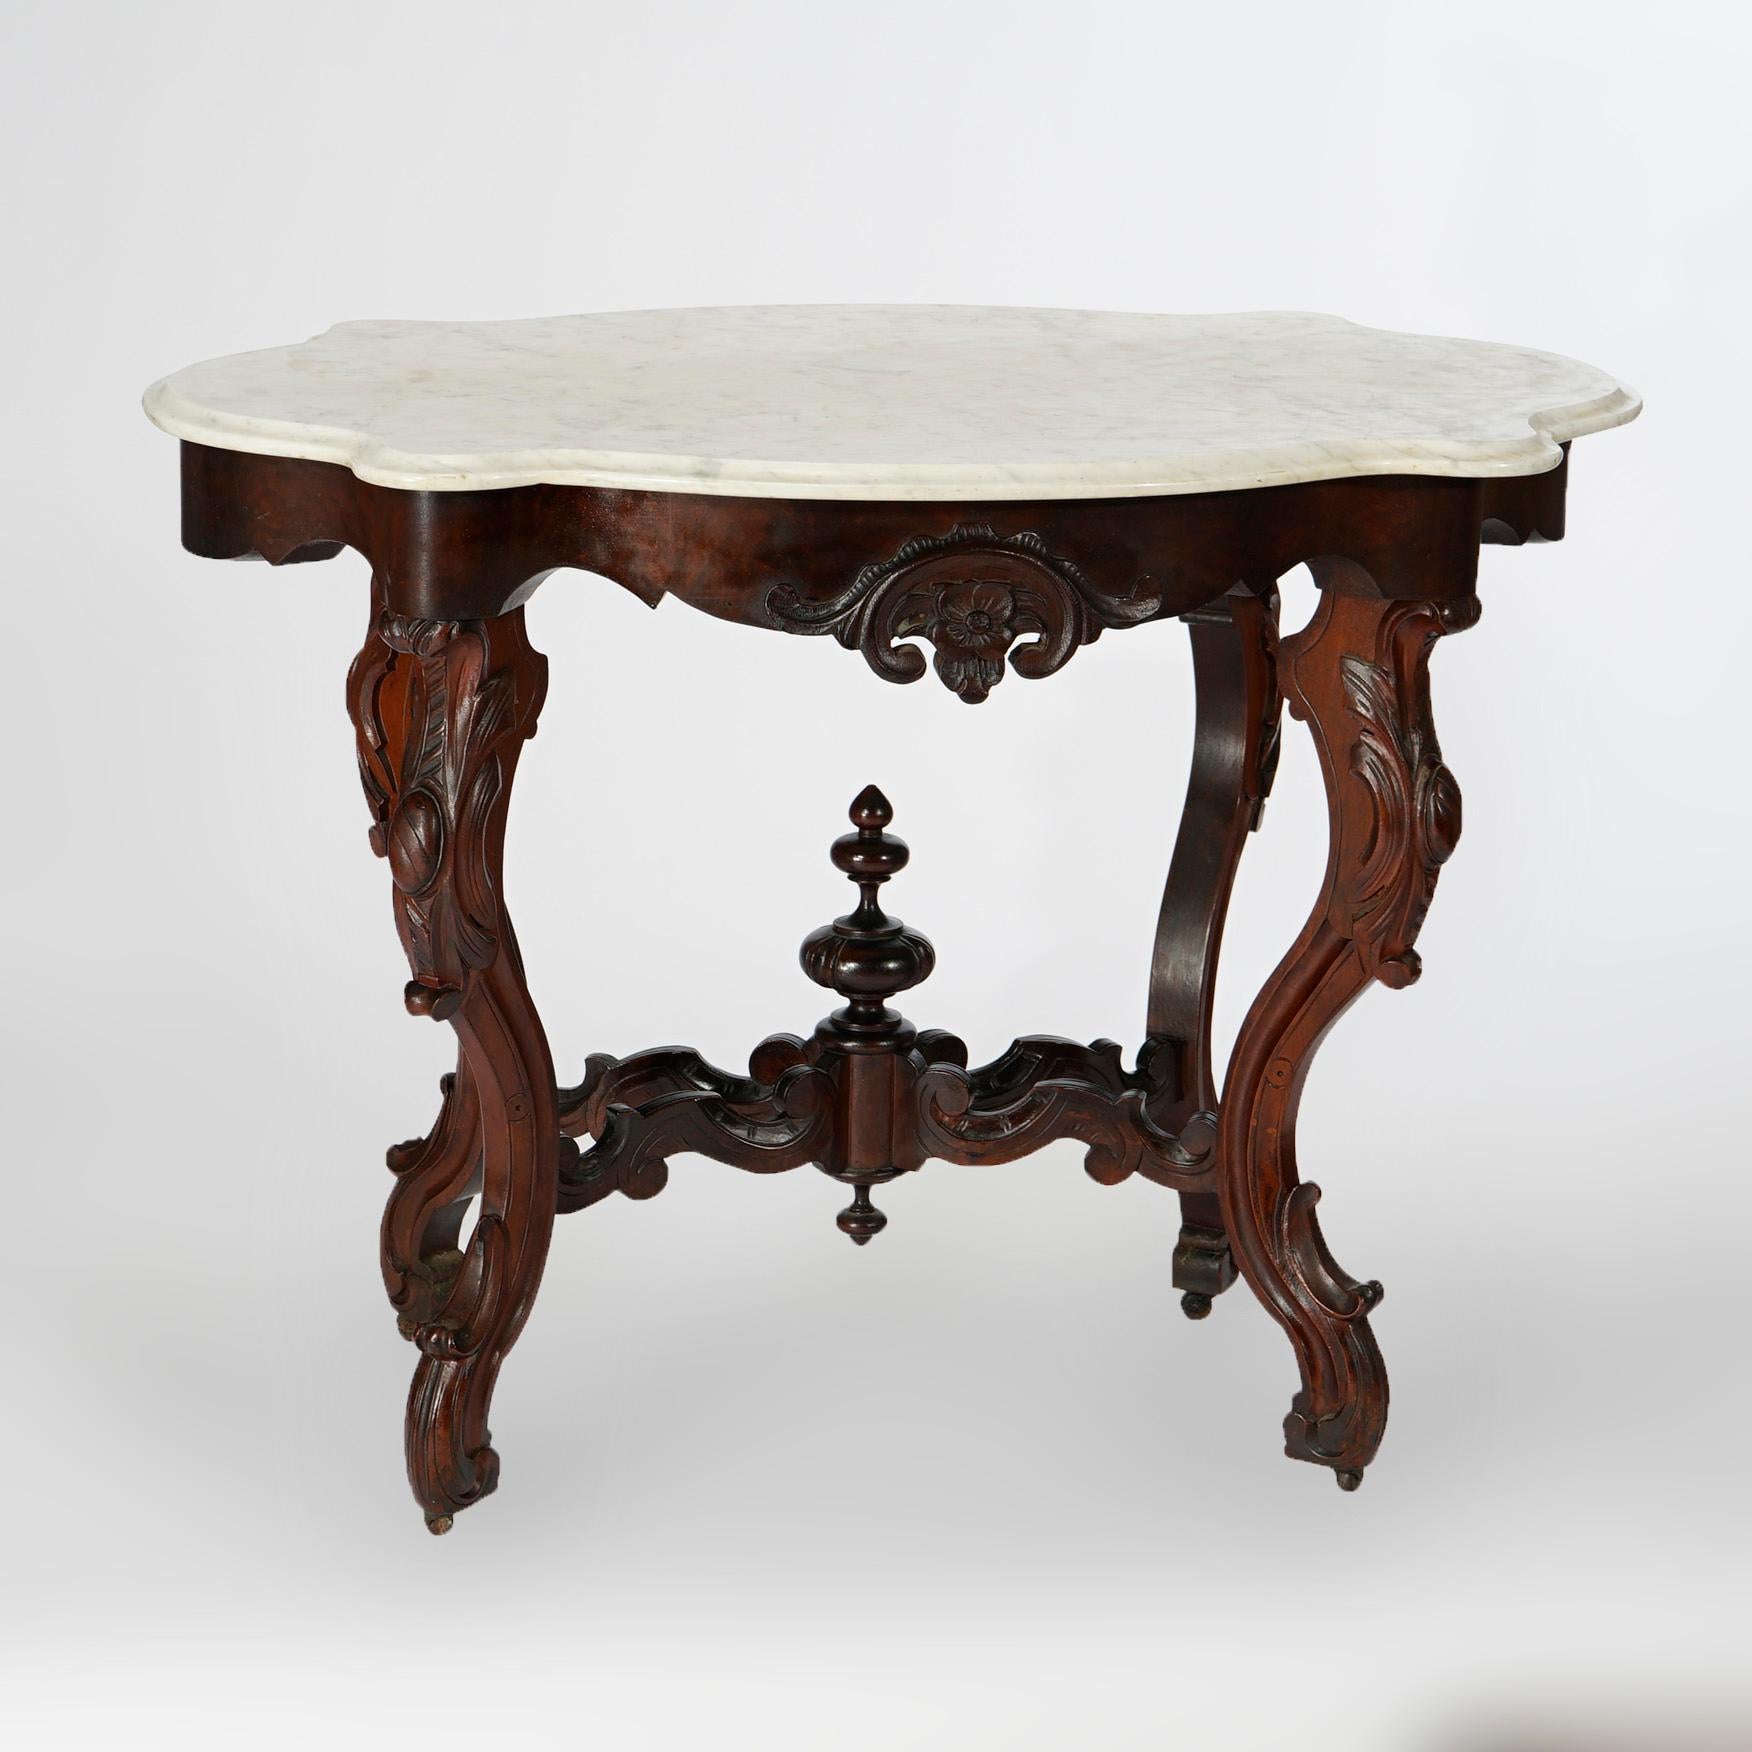 An antique Renaissance Revival parlor table offers shaped and beveled marble turtle top over carved walnut and rosewood base having shaped skirt with floral and foliate elements, raised on decorated cabriole legs with scroll form stretcher having